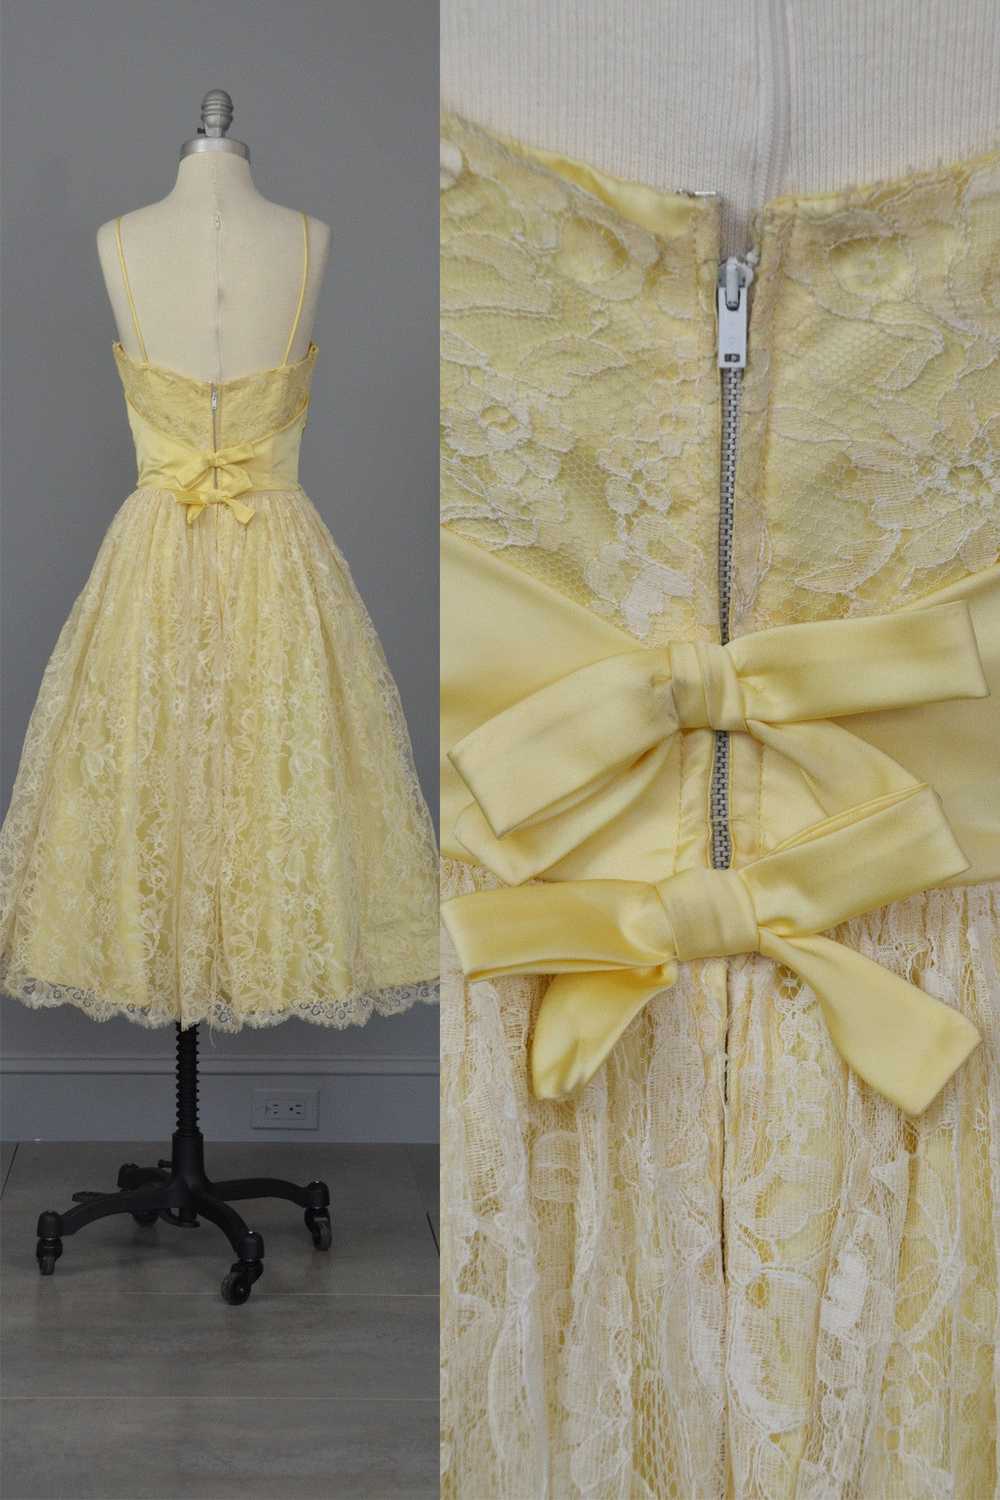 1950s White Lace Buttercup Party Prom Dress - image 4